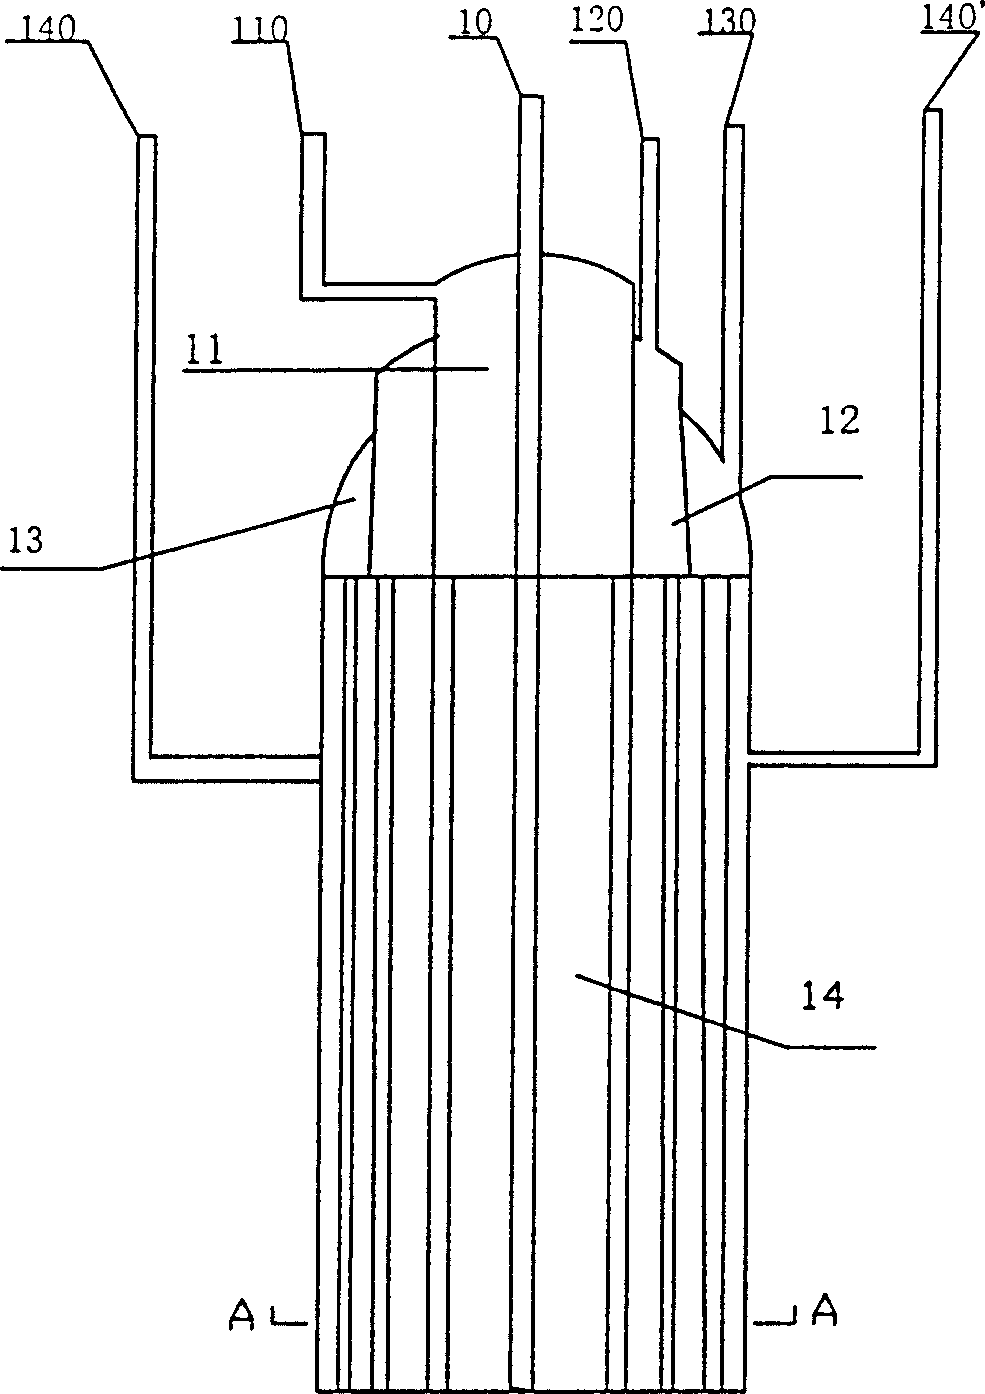 Process for synthesizing quartz glass by horizontal silicon tetrachloride vapor deposition